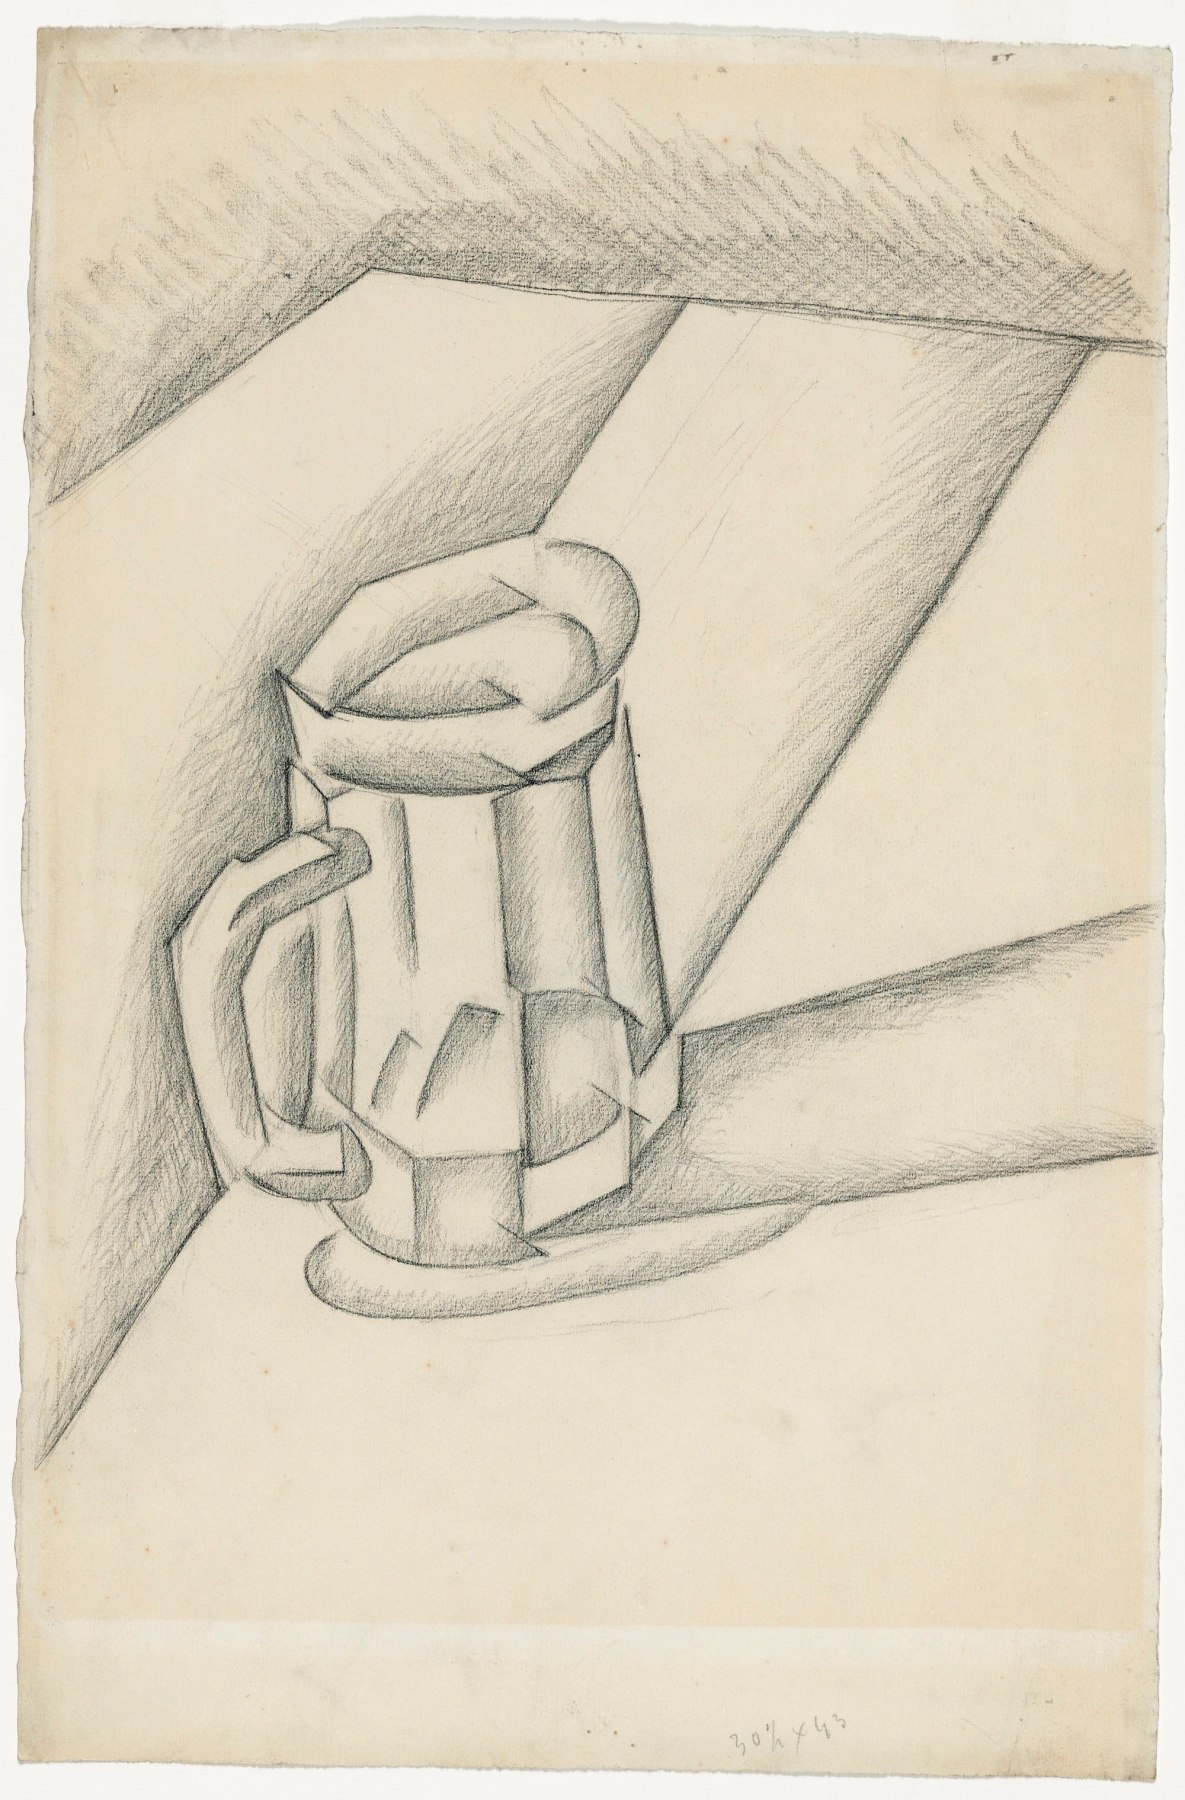 Juan Gris, Bock de Bi&egrave;re, 1911 Charcoal on paper 47.8 x 31.5 cm. (18 7/8 x 12 3/8 in.) This painting is a drawing in a cubist manner of a beer pint on a table.